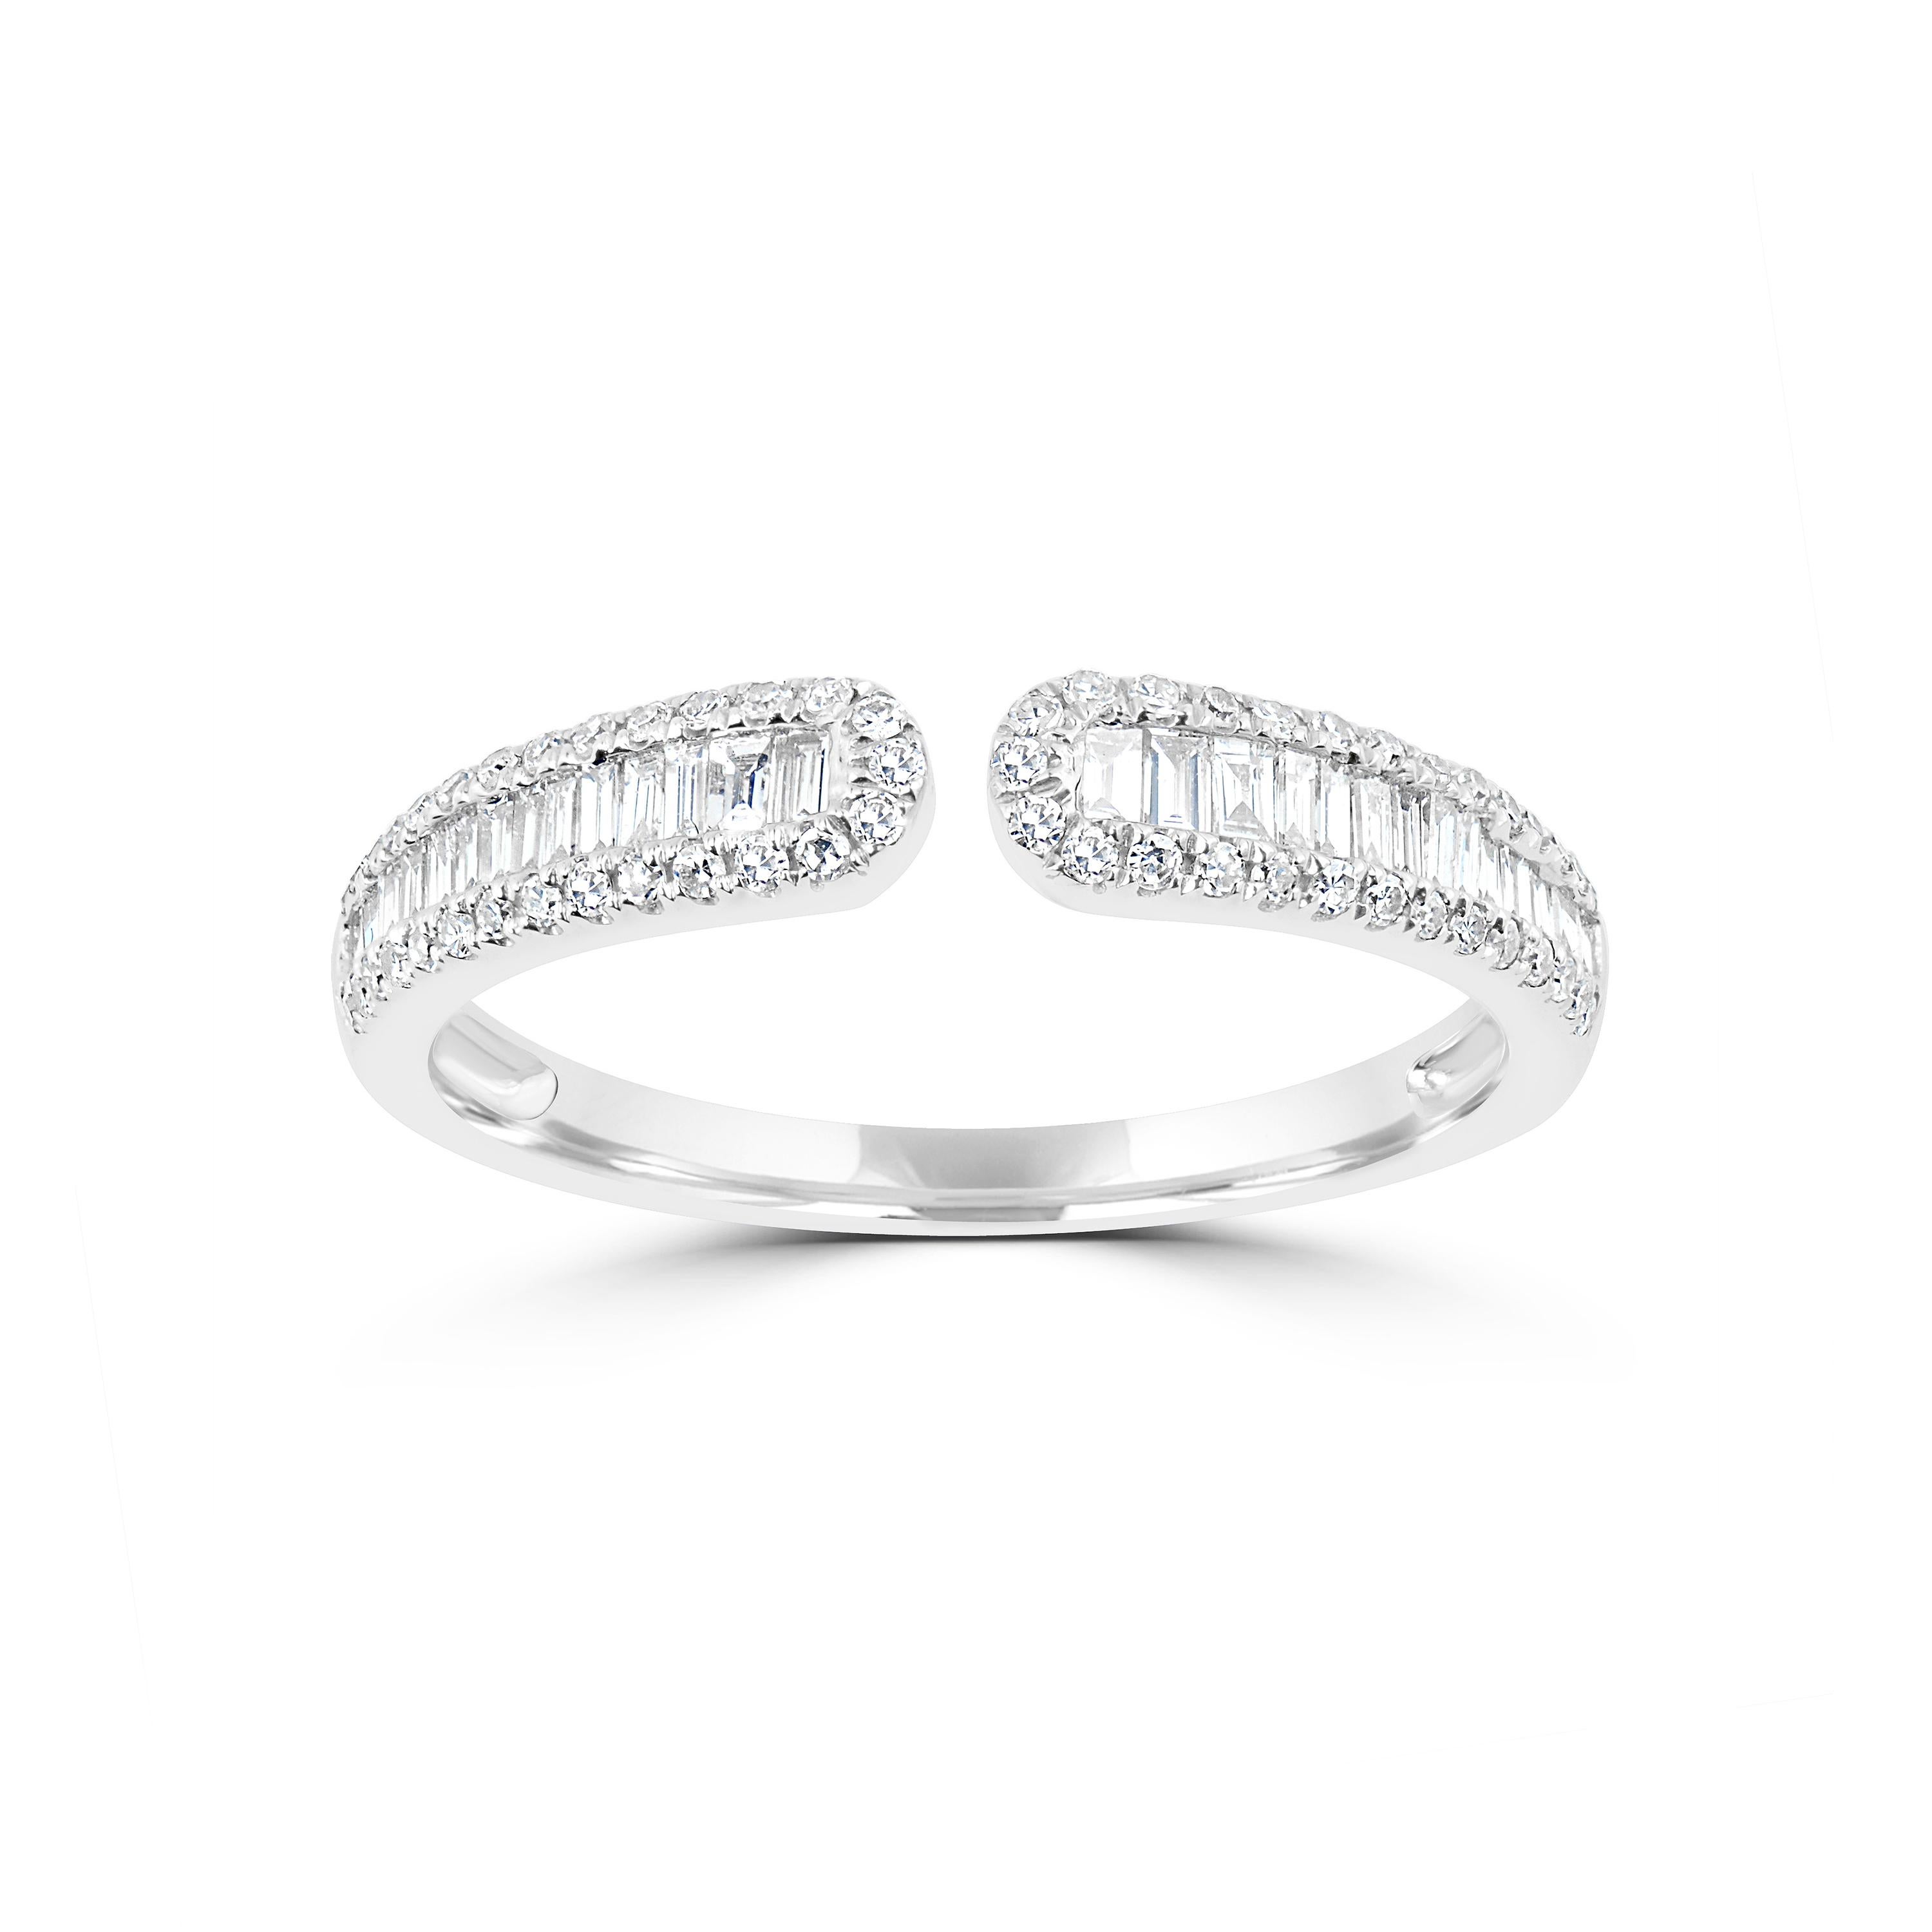 This ring is full of sparkle and style. Crafted by Luxle in 14K white gold it consists of 22 baguette diamonds and 58 round diamonds.
Please follow the Luxury Jewels storefront to view the latest collections & exclusive one of a kind pieces. Luxury